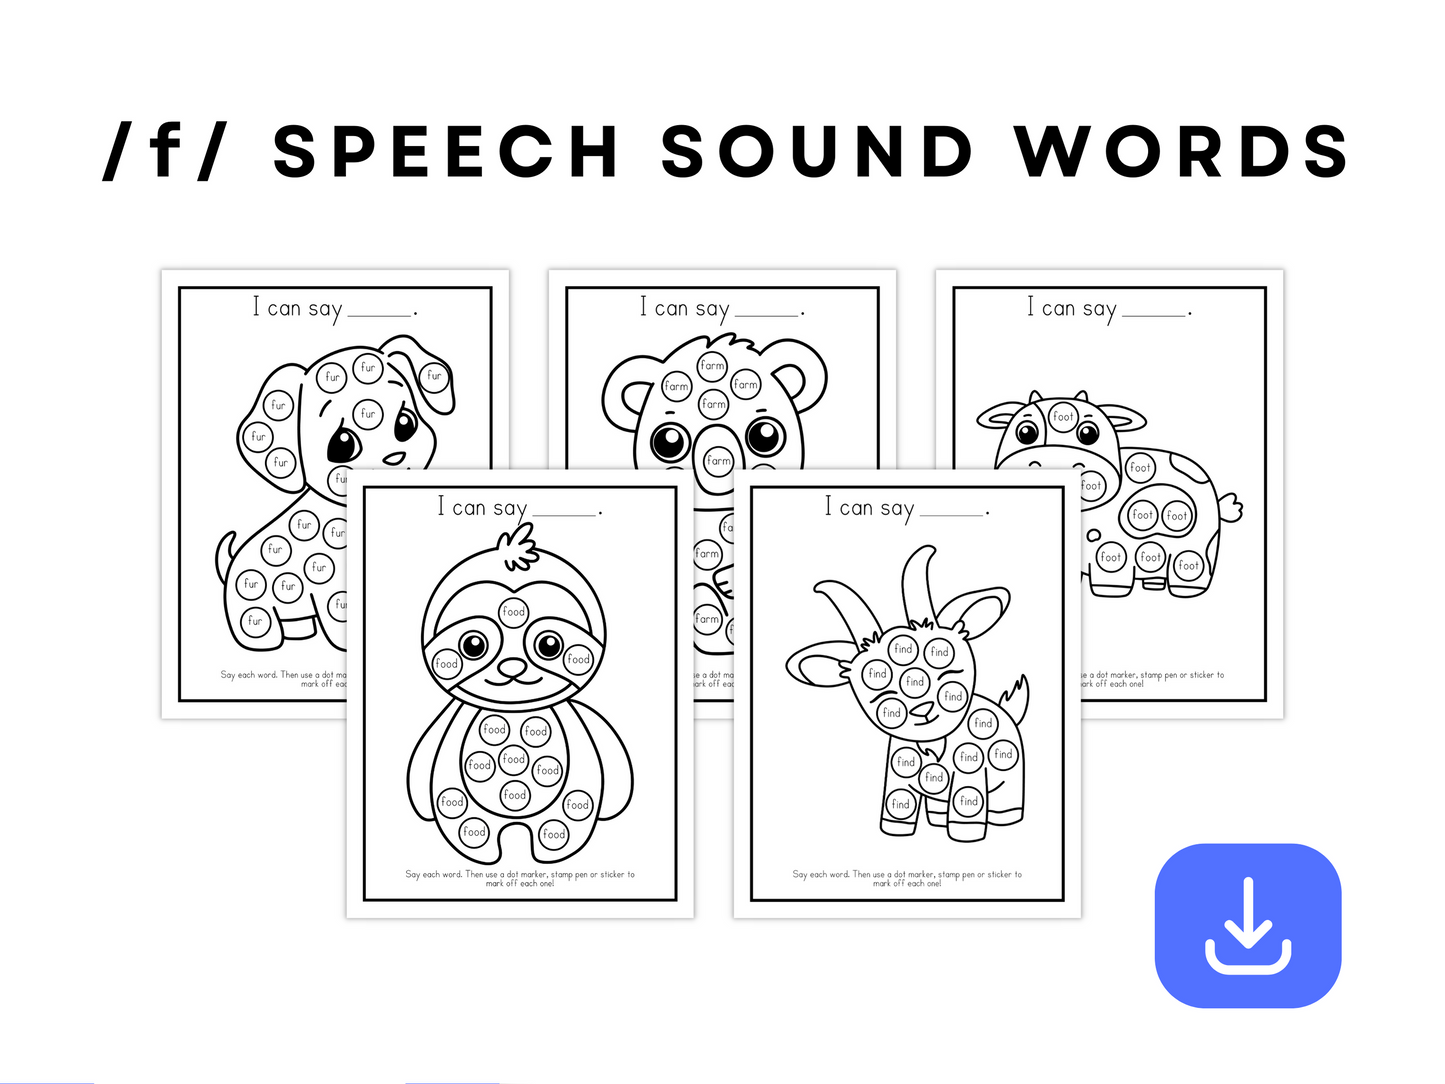 Dot Marker Speech Sound Practice Coloring Pages | /f/ Sound Words